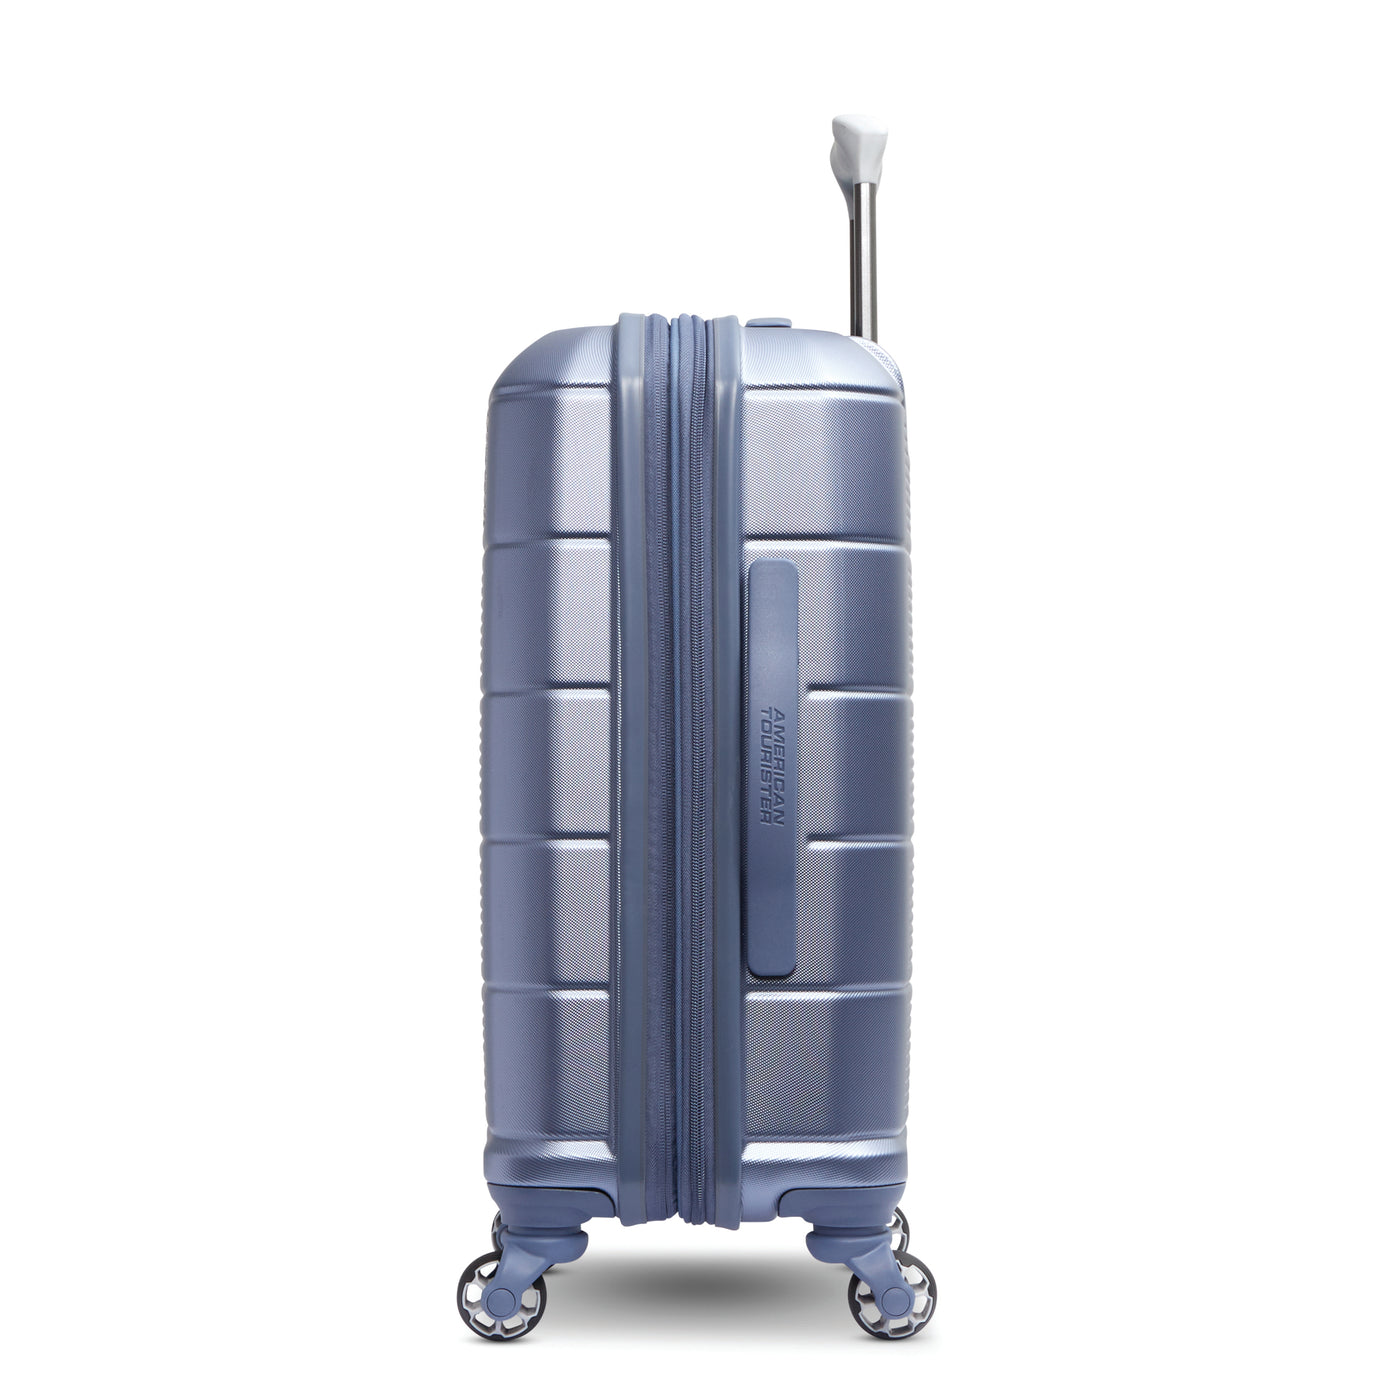 American Tourister Logo. they are American Luggage Manufacturer and  Retailer, with Products Ranging from Large Suitcases To Small Editorial  Stock Image - Image of market, brand: 218225729